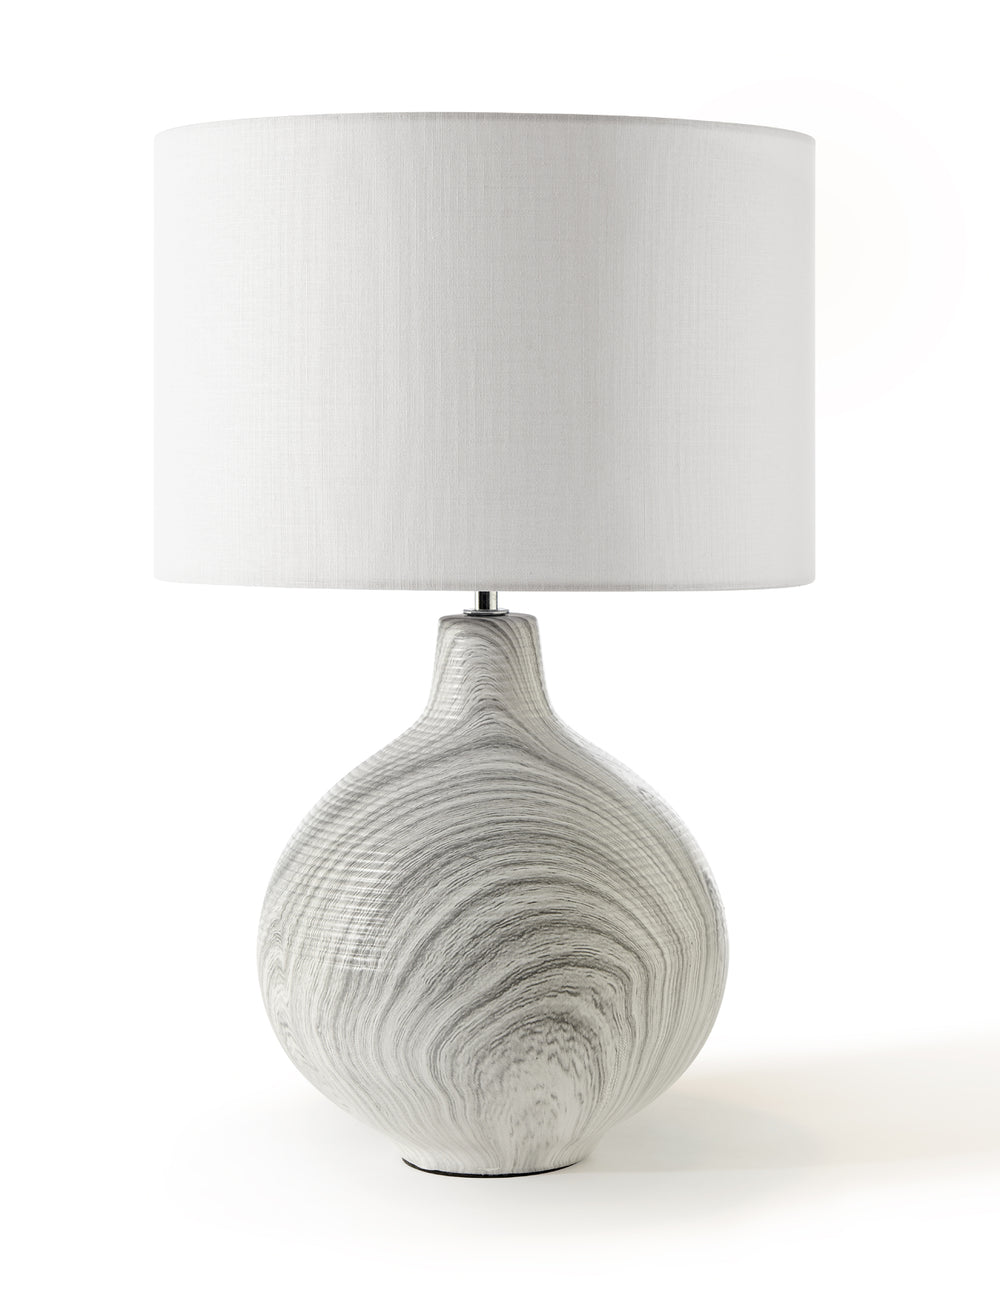 Sherwood Lighting Textured Concrete Bedside Table Lamp White Shade